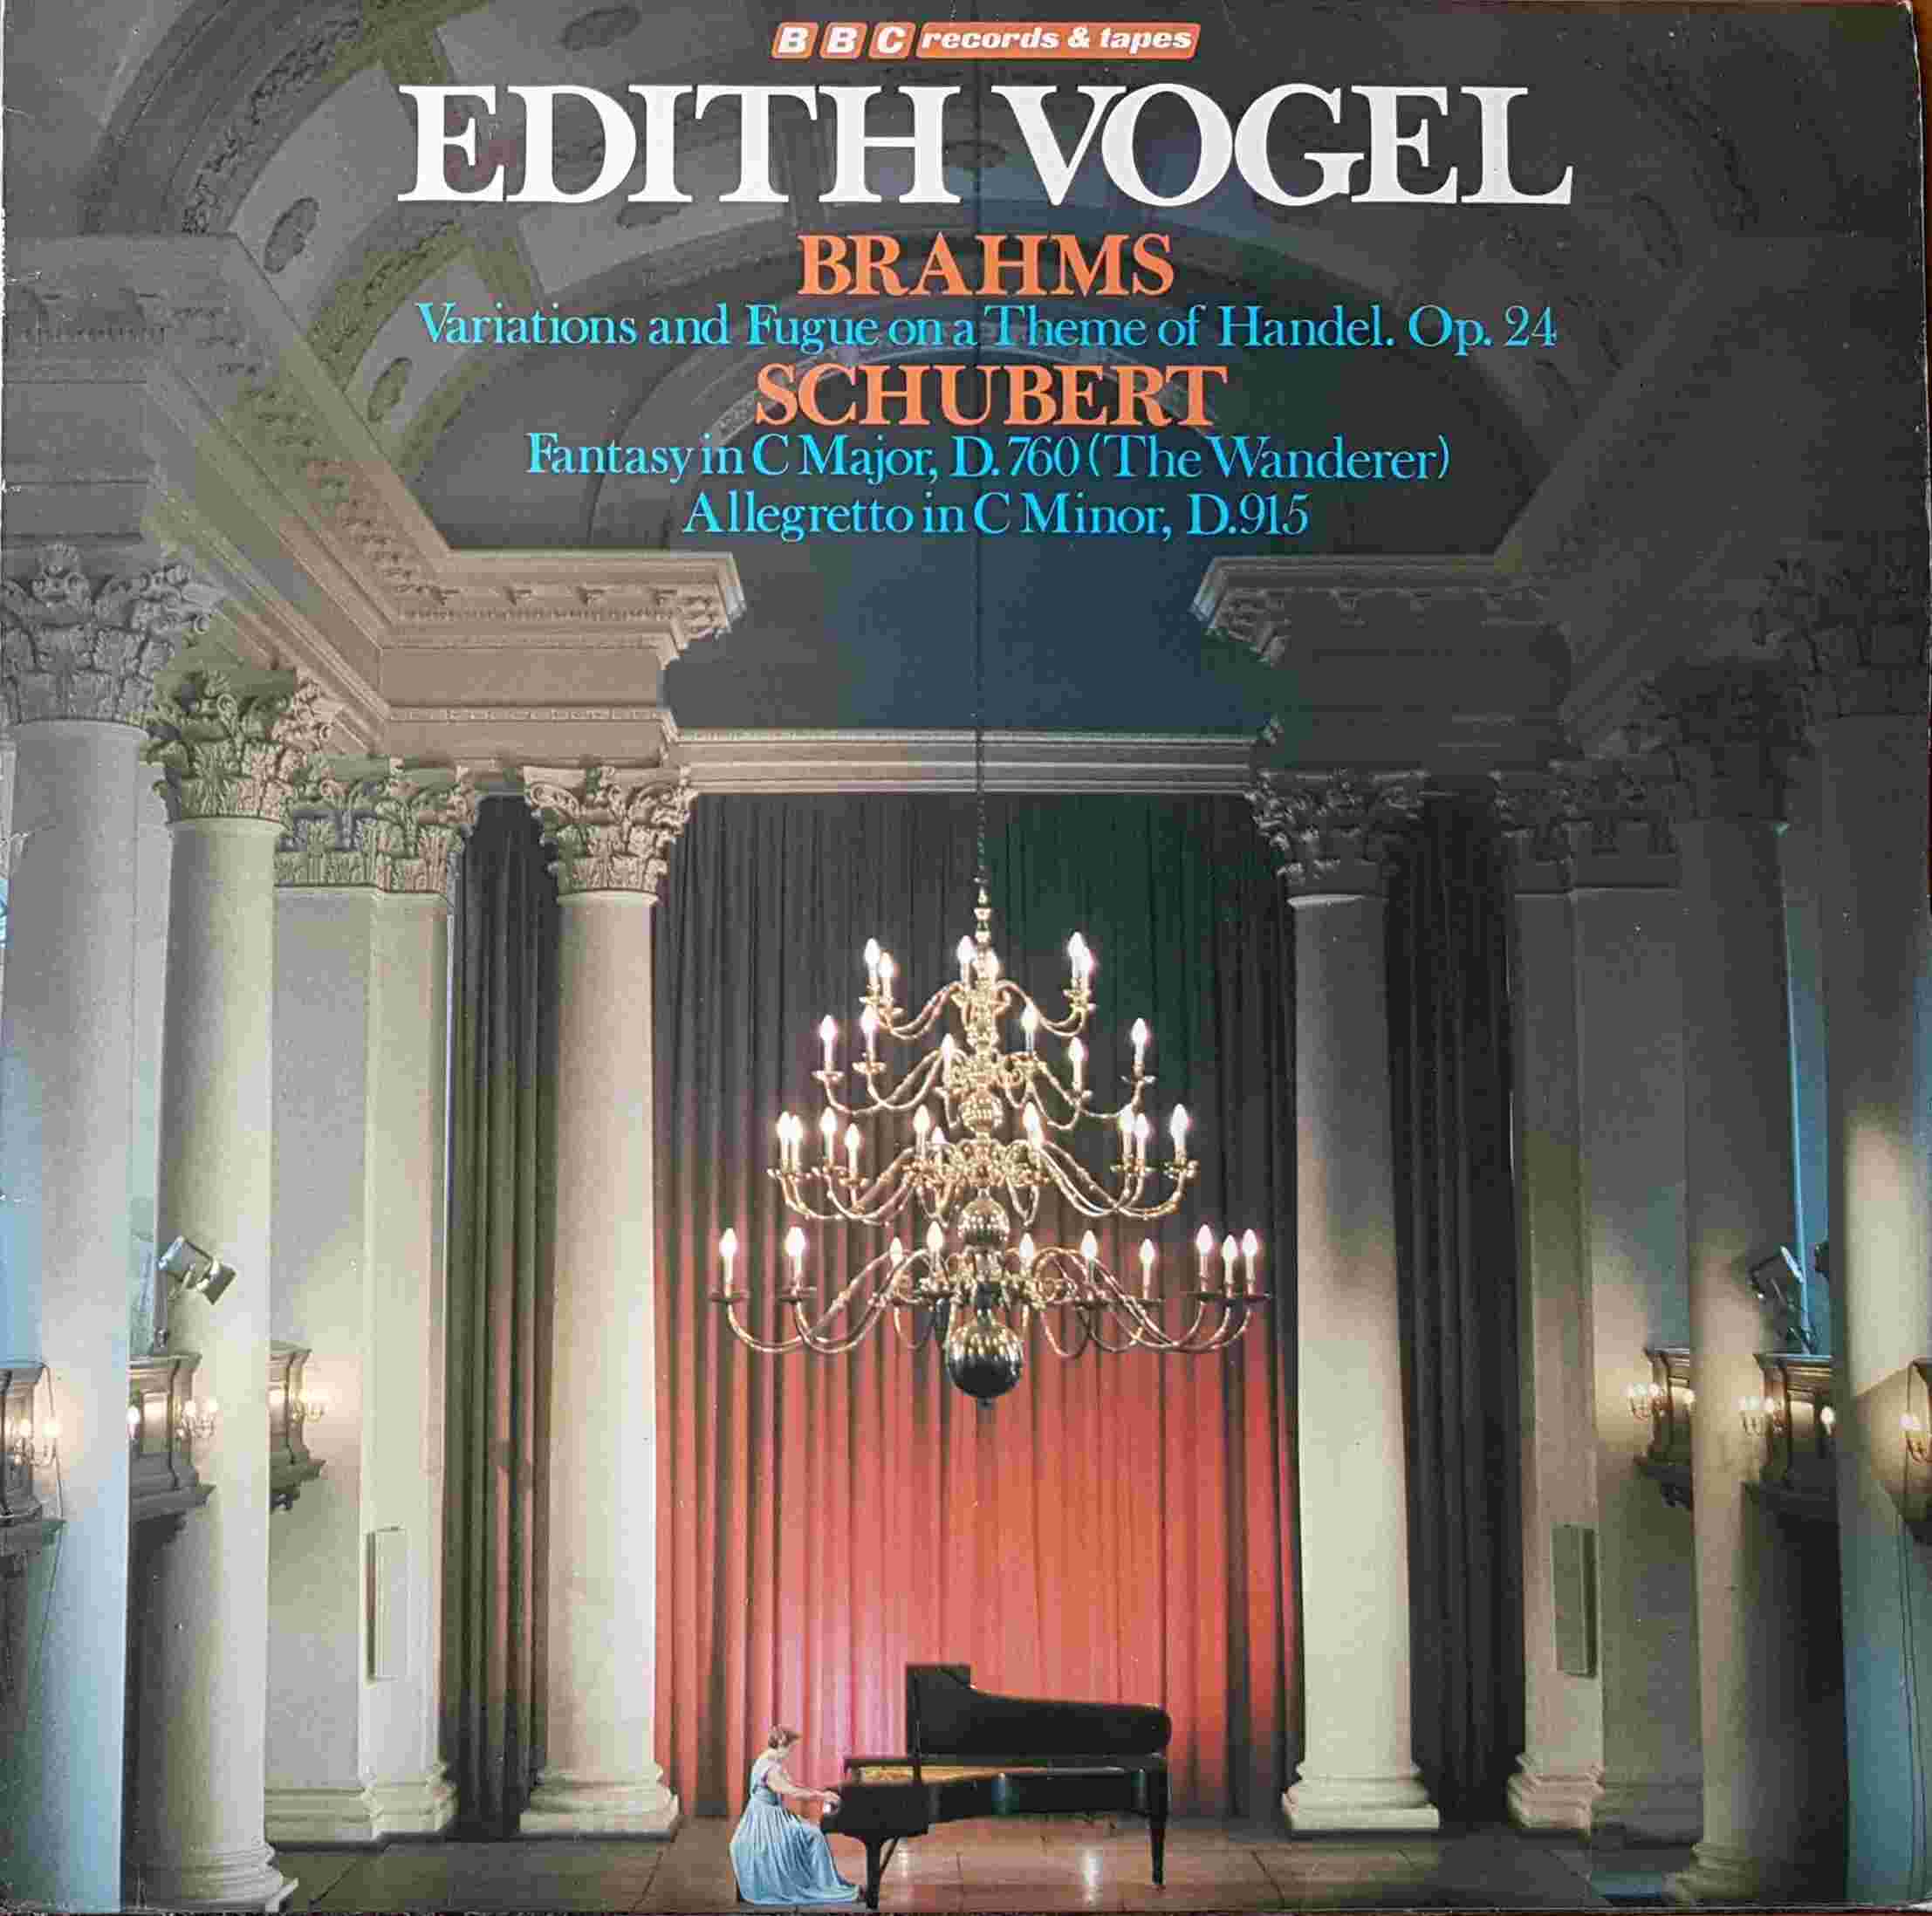 Picture of REC 329 Brahms Schubert - Edith Vogel by artist Edith Vogel from the BBC albums - Records and Tapes library